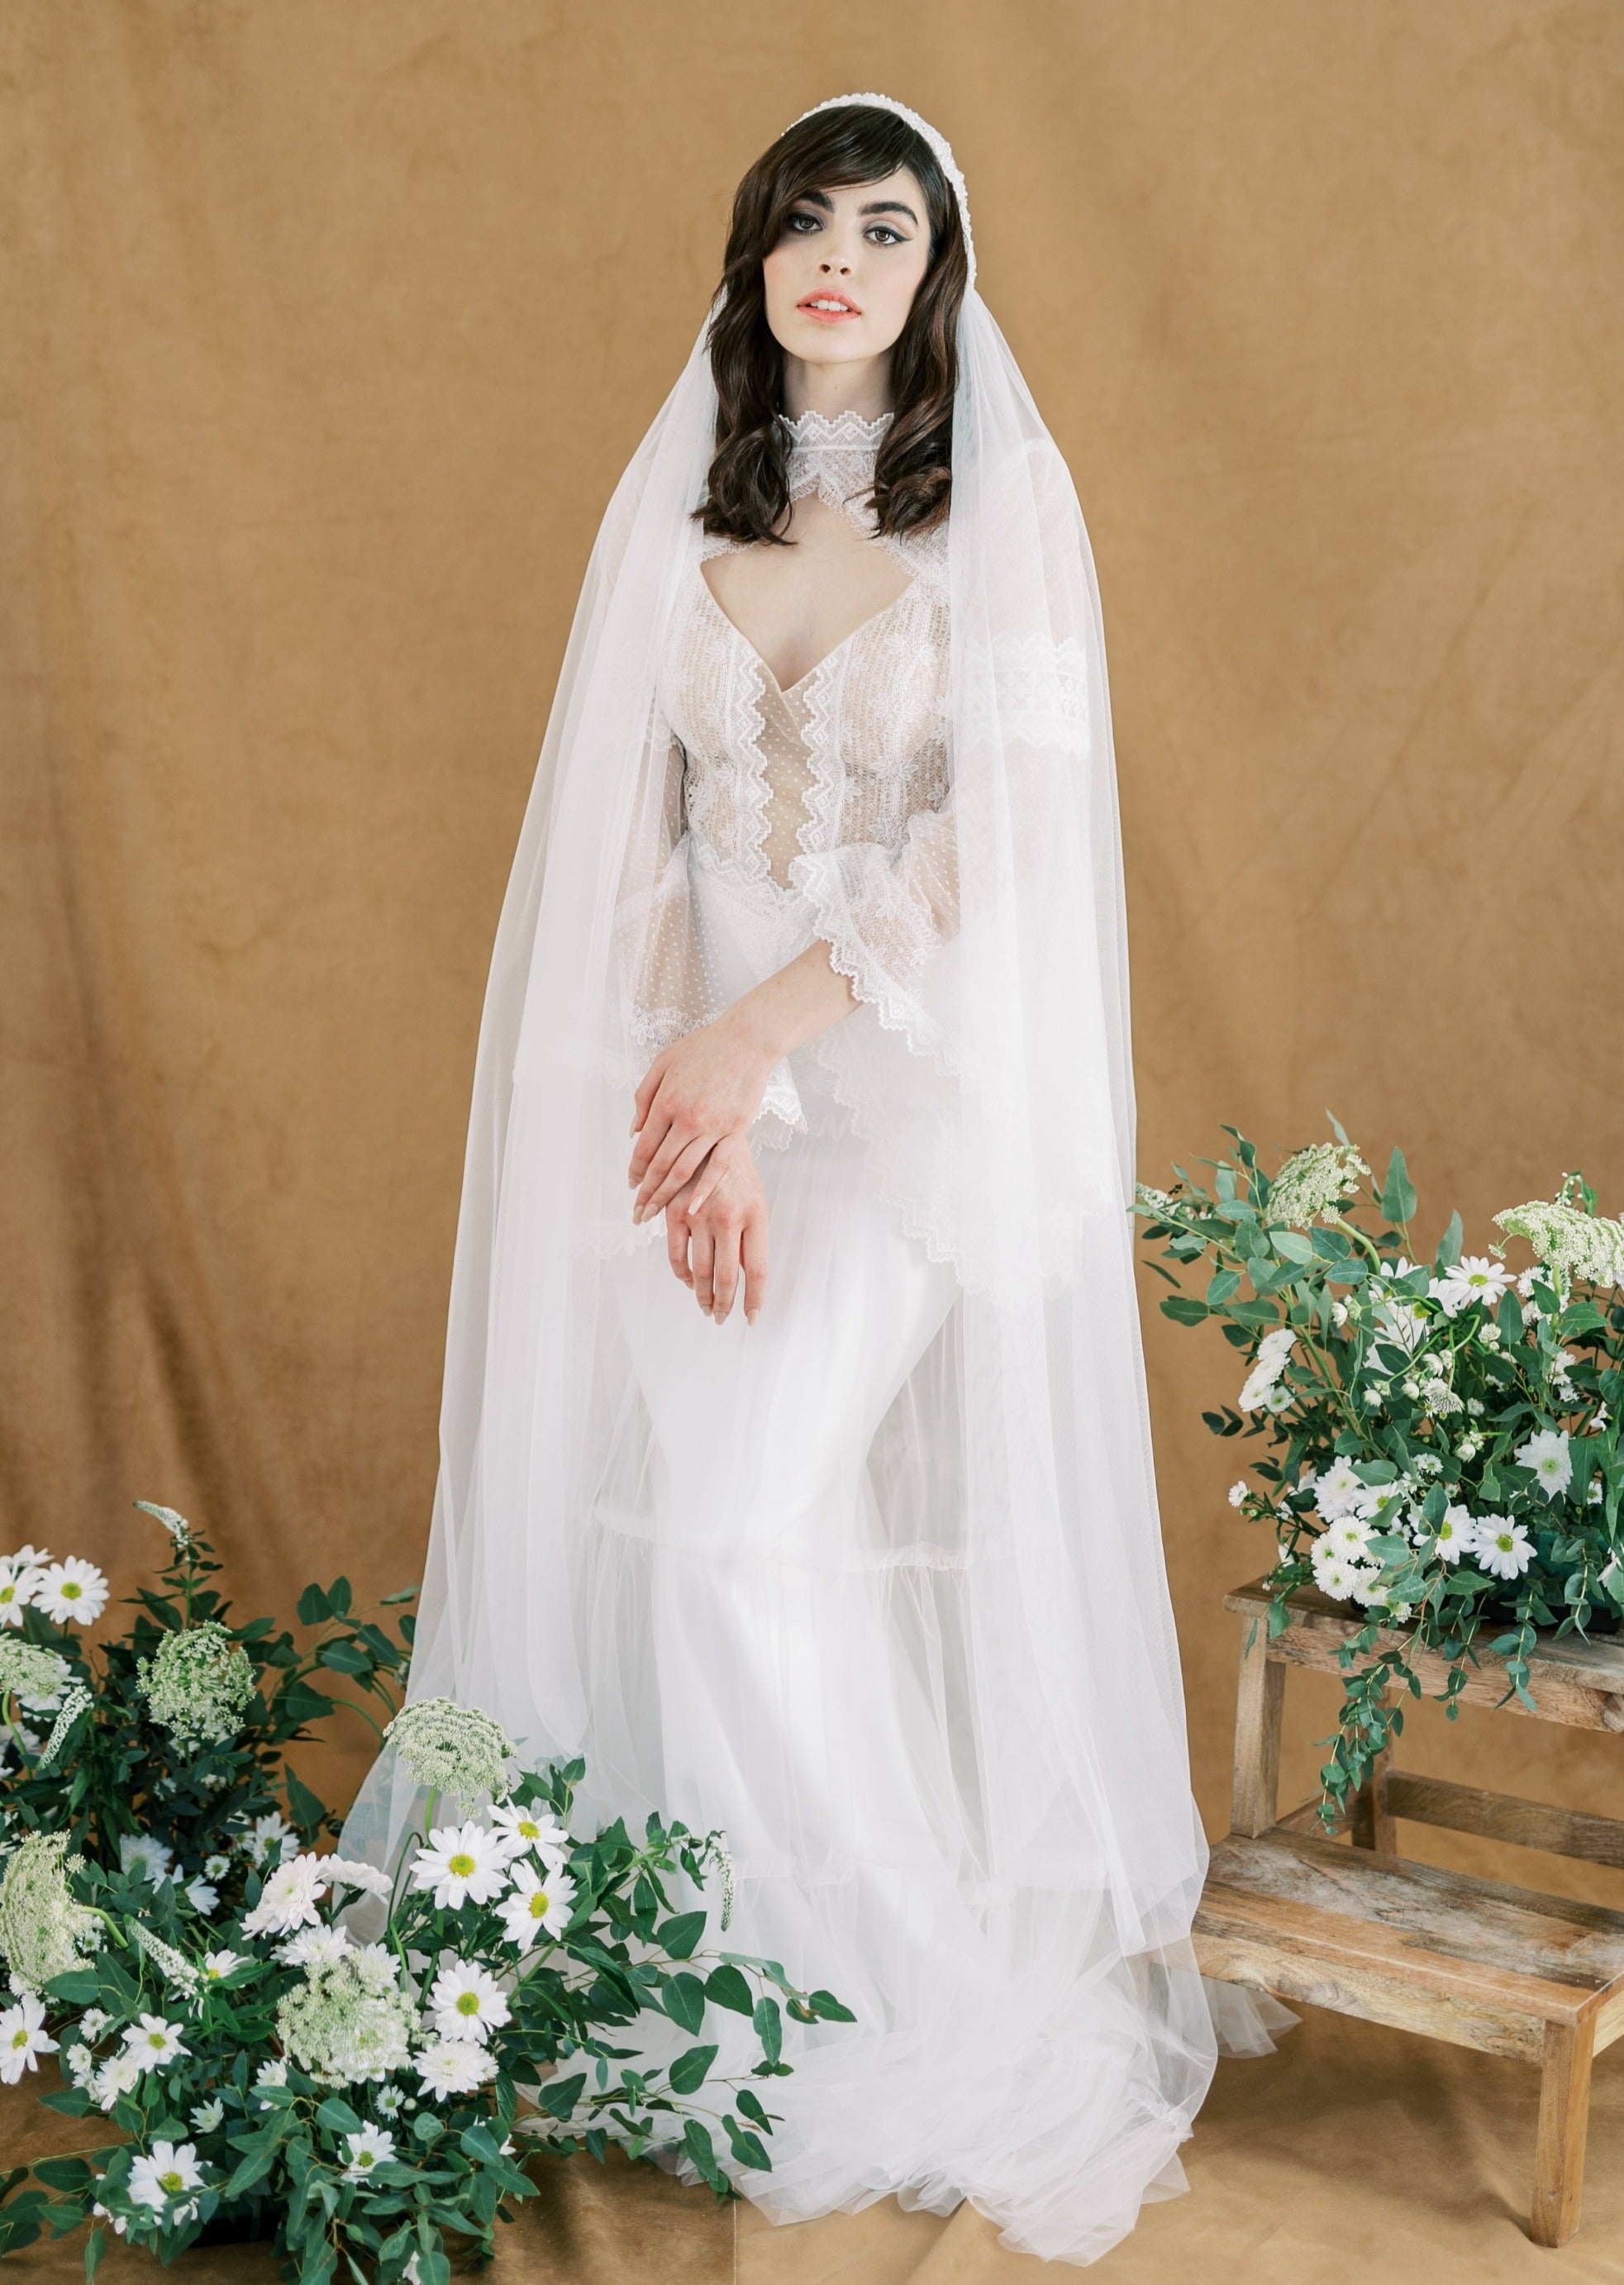 Mantilla lace trimmed veil with headband - Style #709